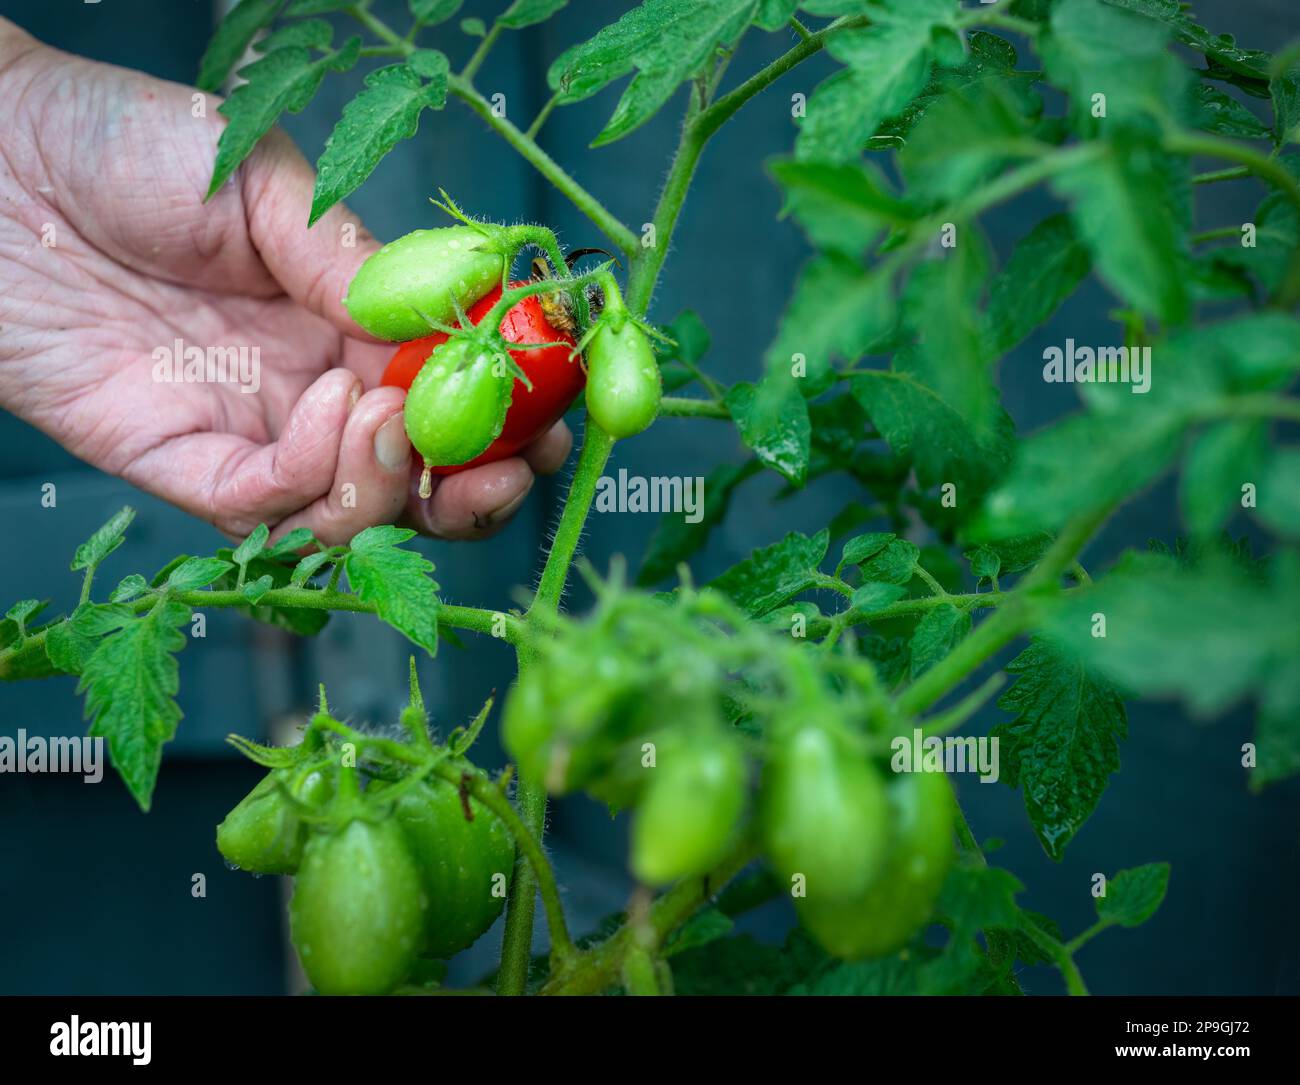 Hand holding a ripe red tomato among green tomatoes in the backyard garden. Stock Photo